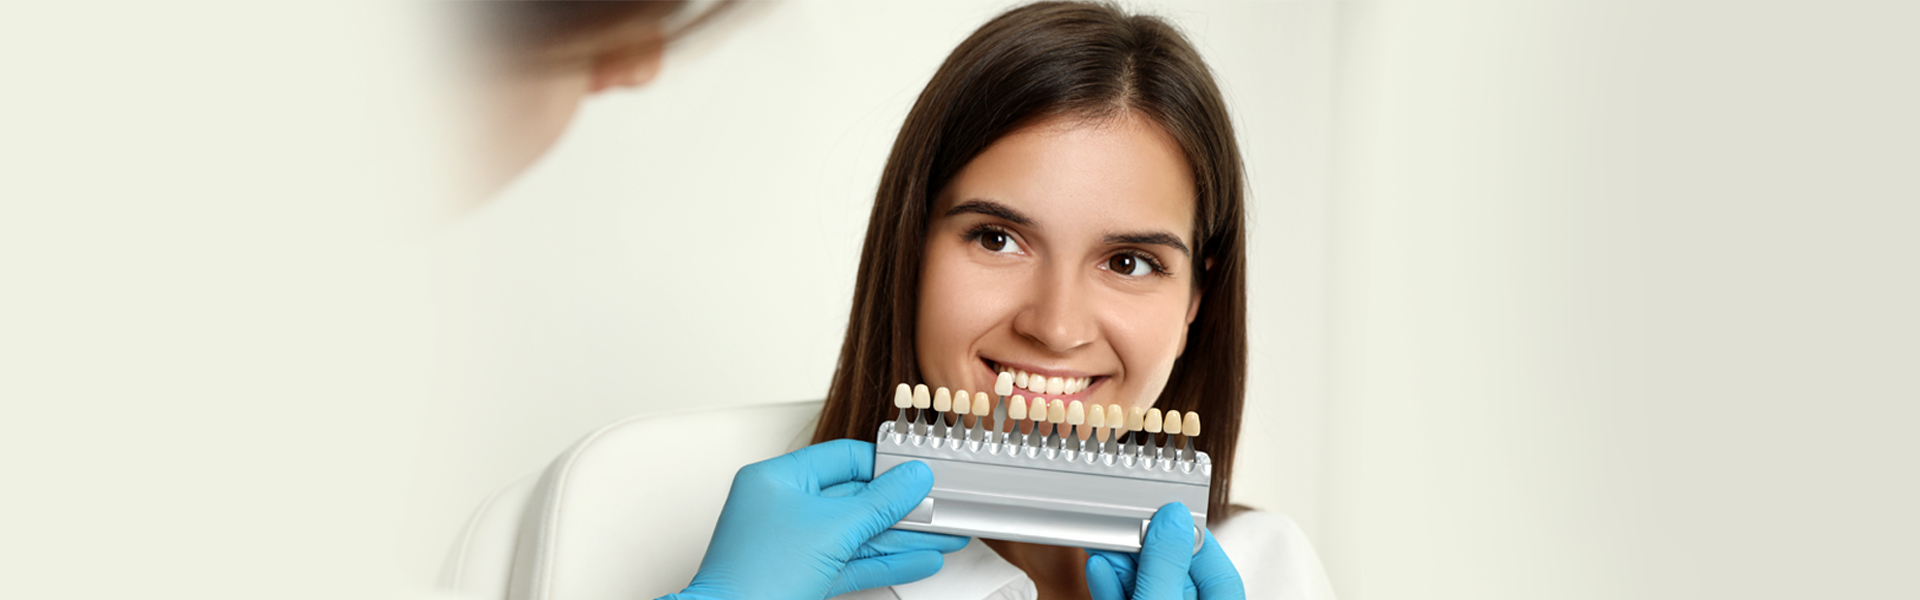 What Types of Problems do Dental Veneers Fix?